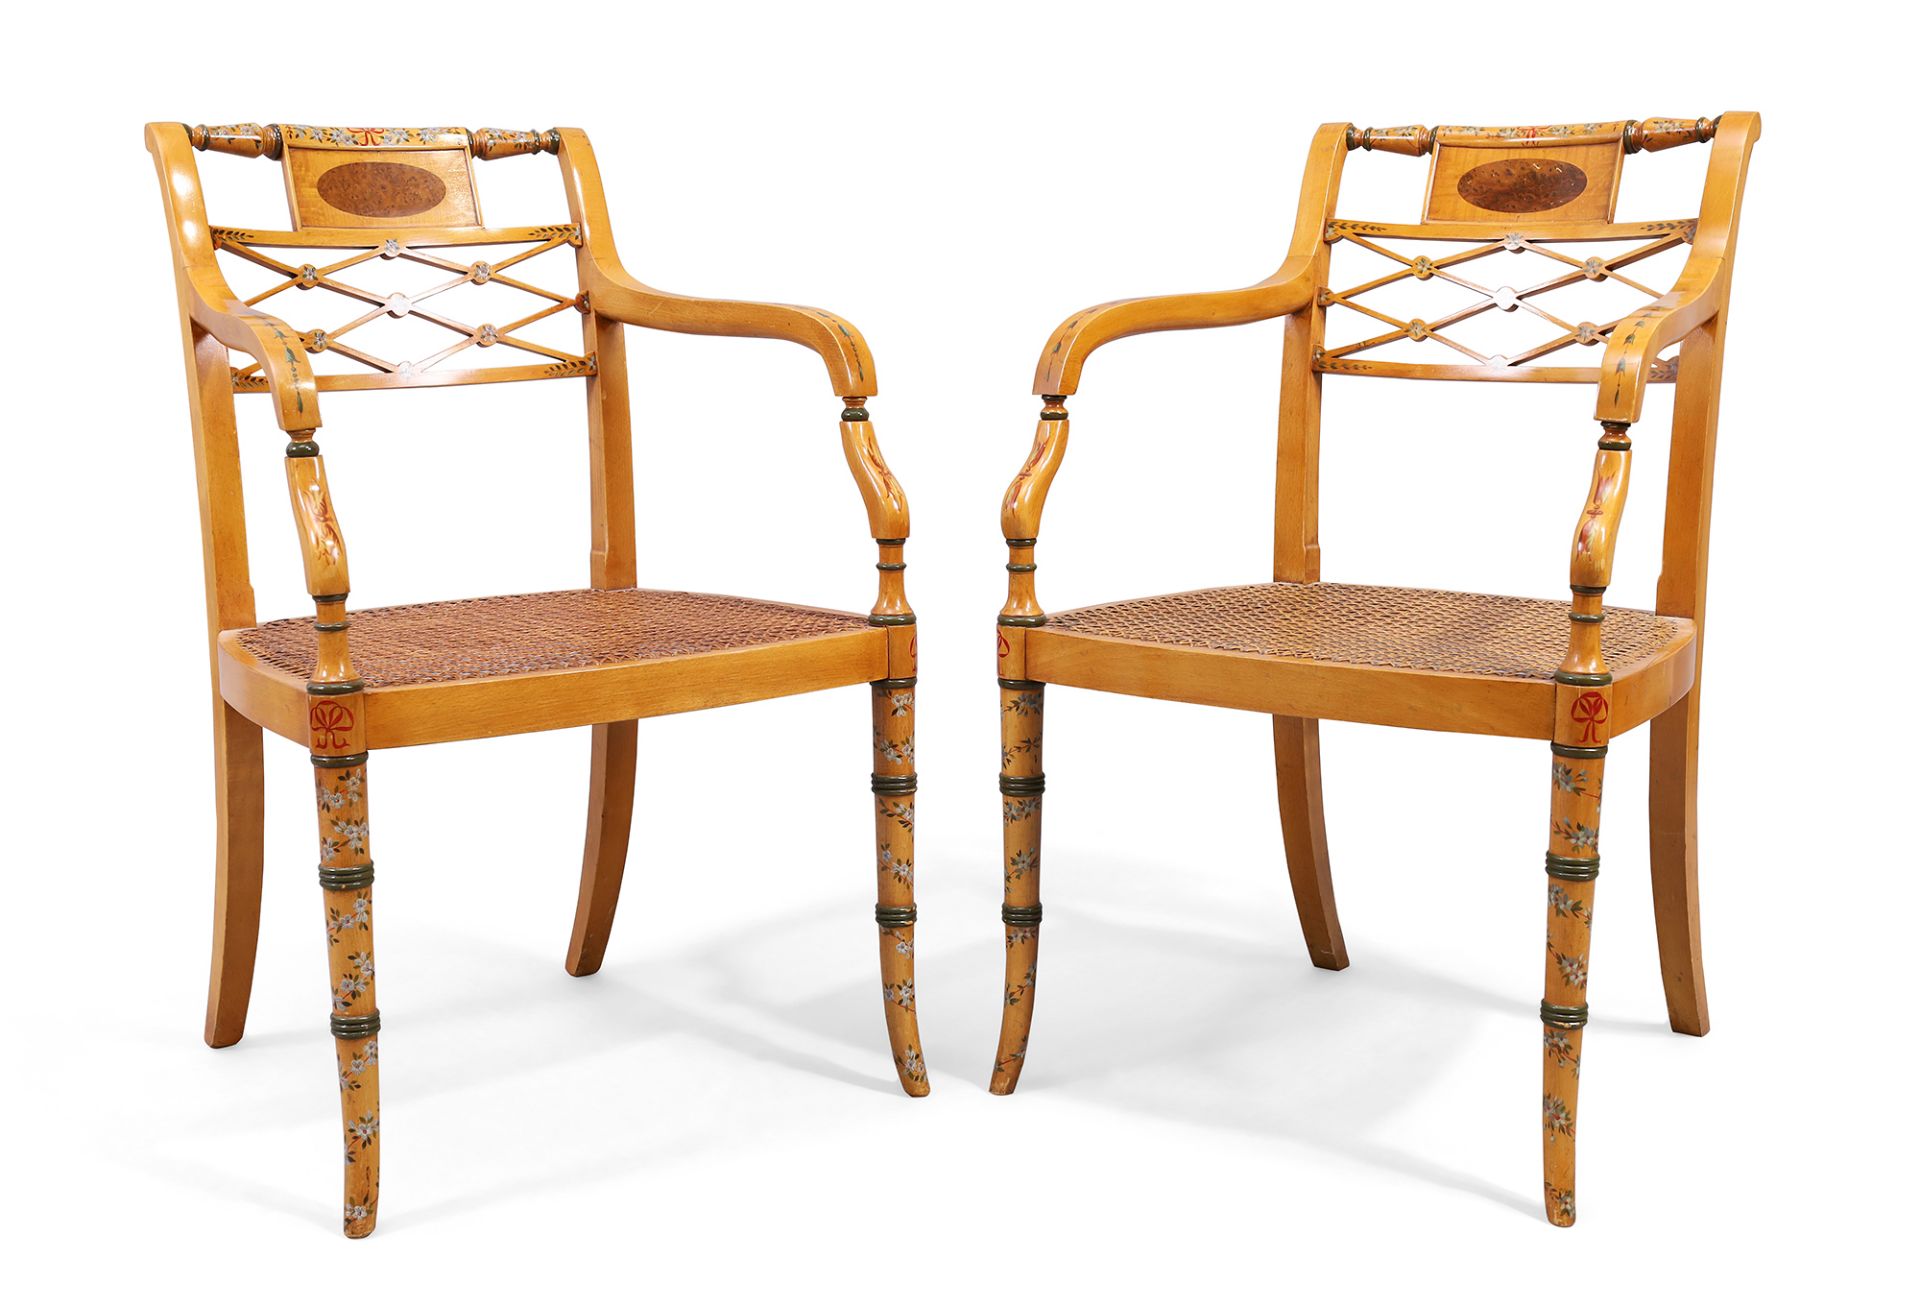 A pair of English inlaid satinwood armchairs, in Sheraton style, 20th century, polychrome painted...